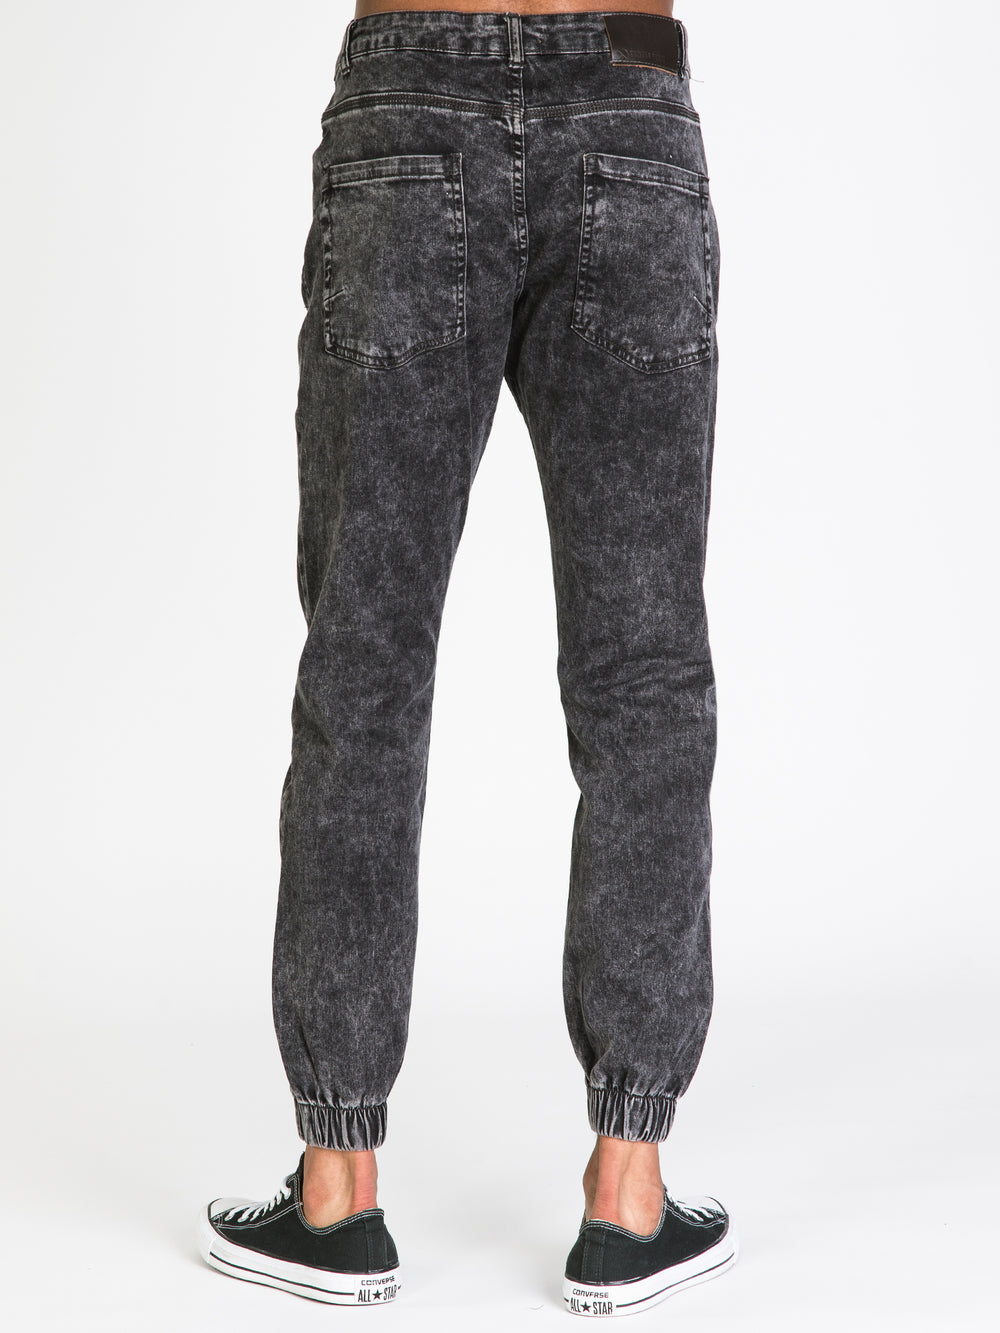 TAINTED DENIM JOGGER - CLEARANCE